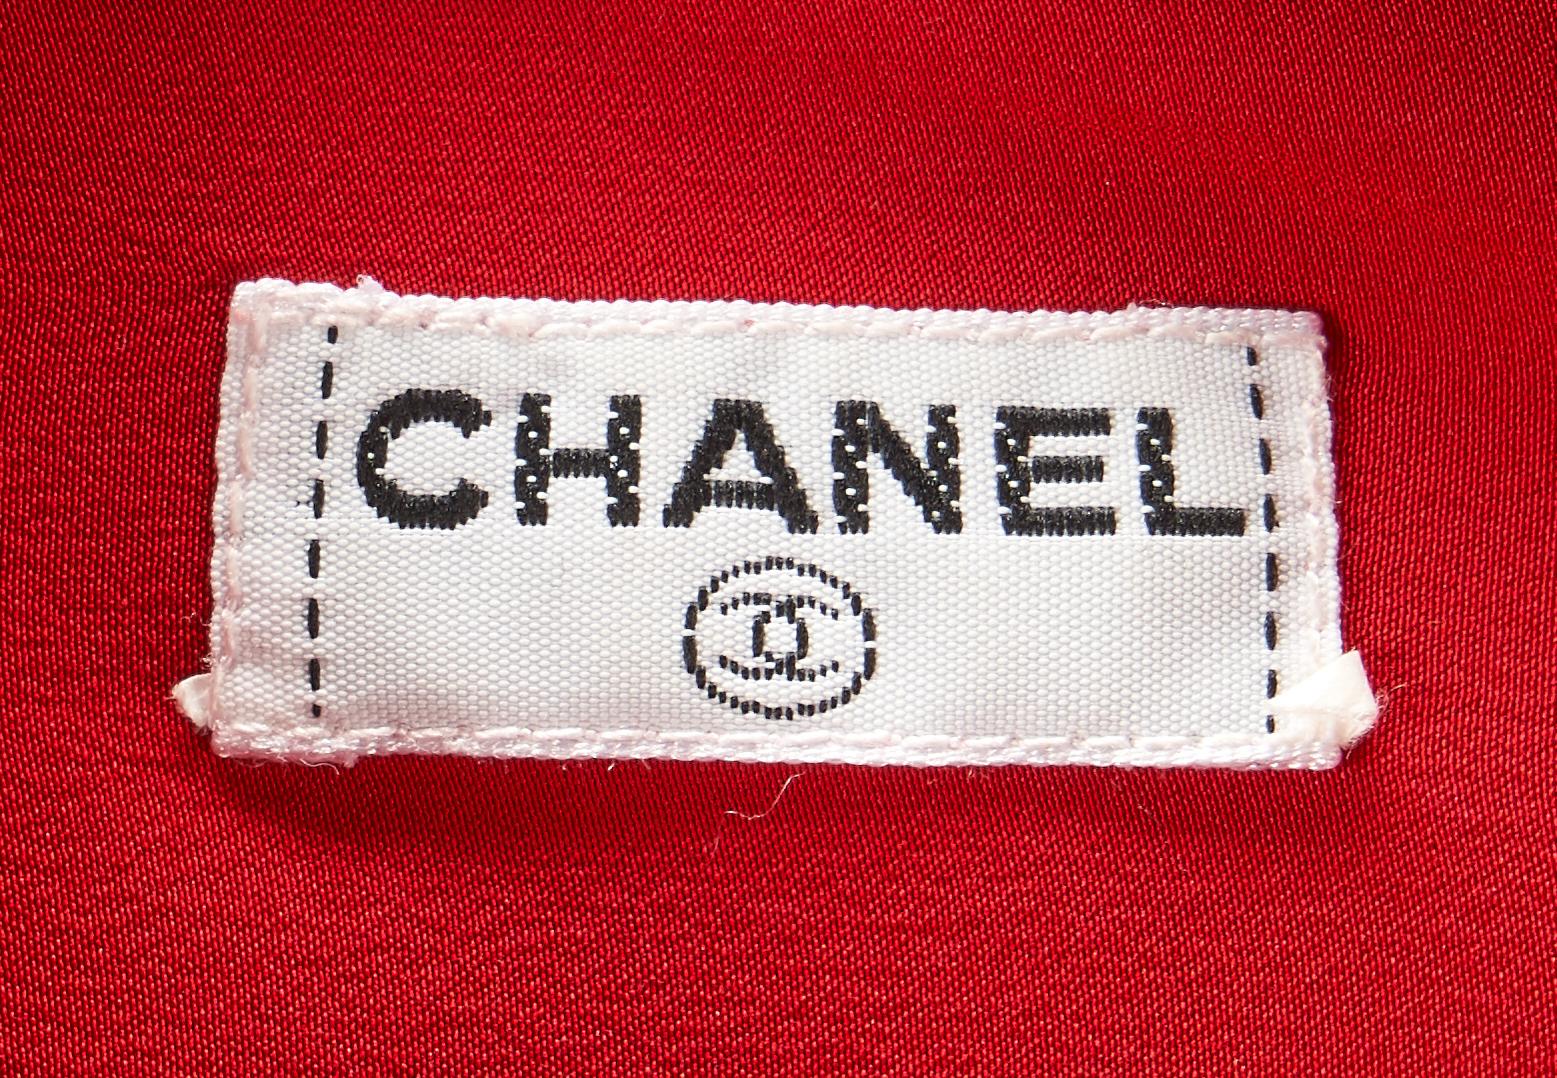 5 Chanel Designer Clothing Items, incl. Outerwear - Image 23 of 24